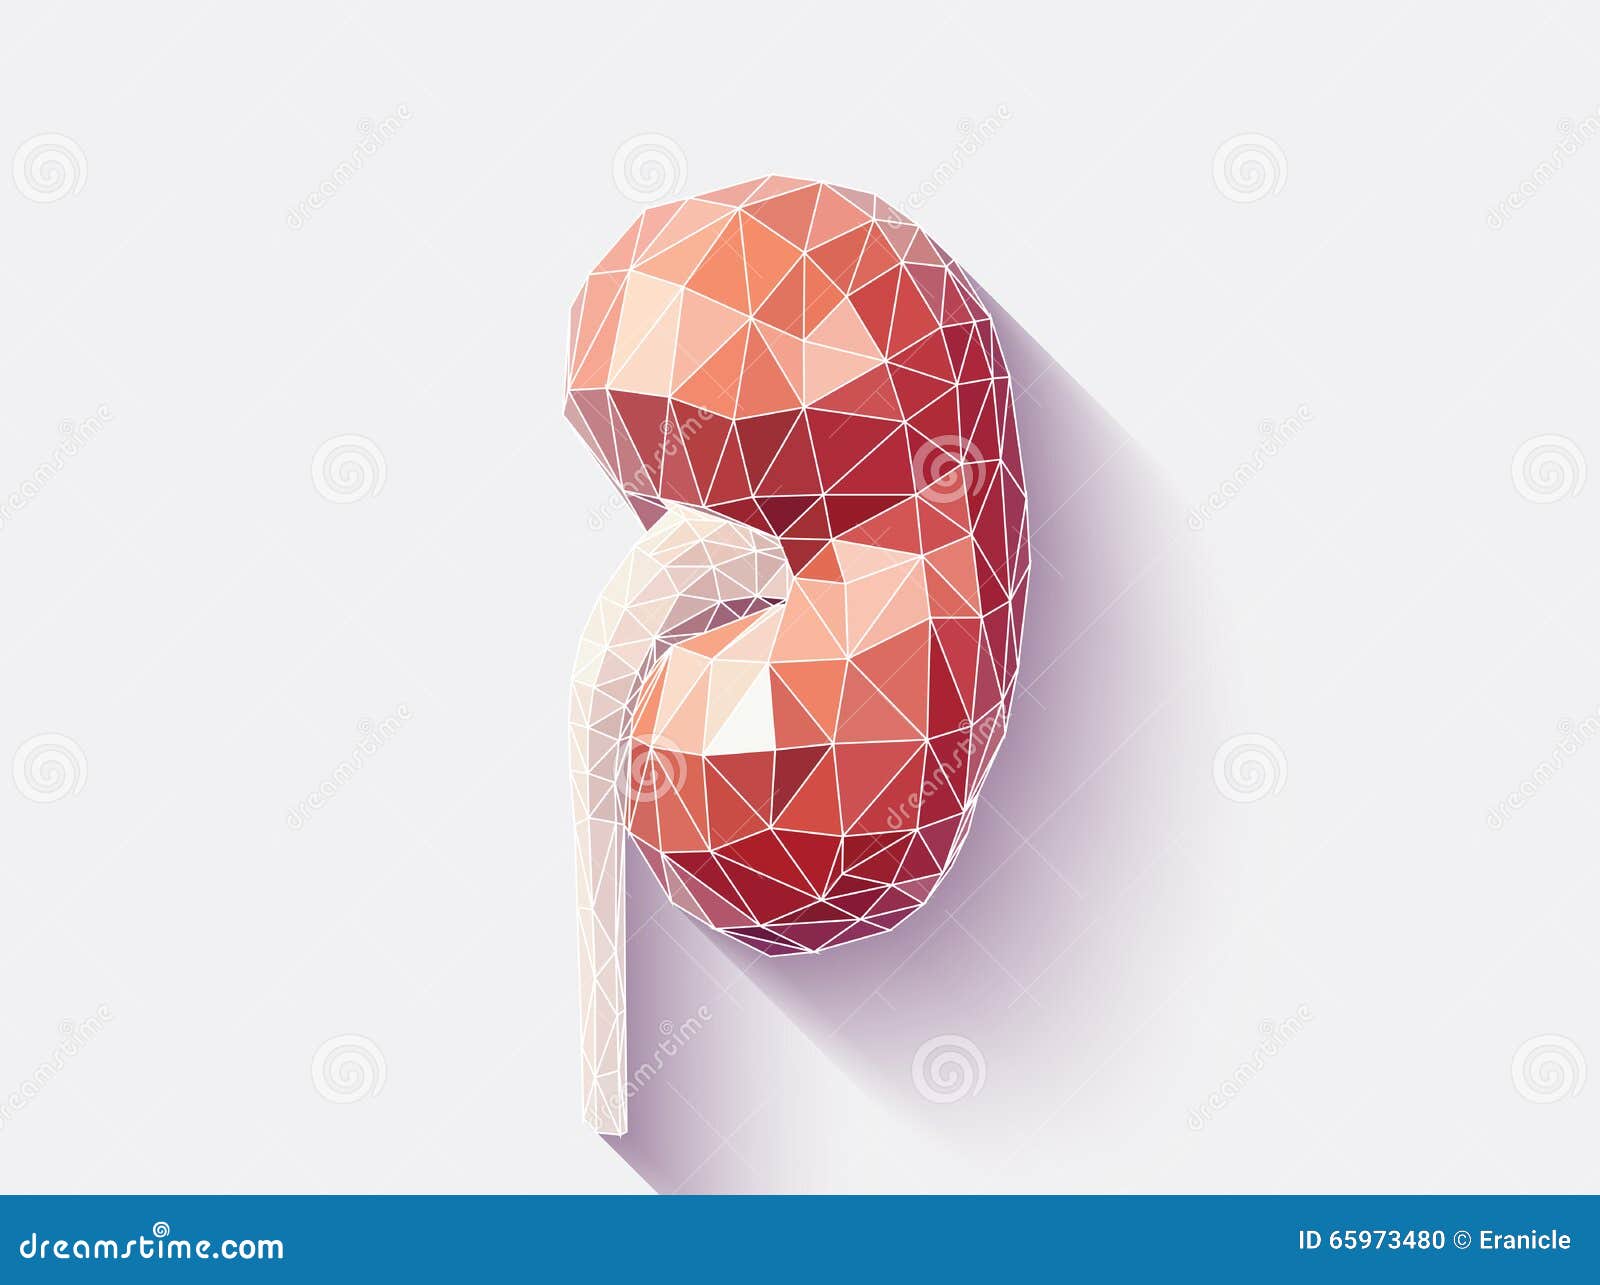 kidney faceted